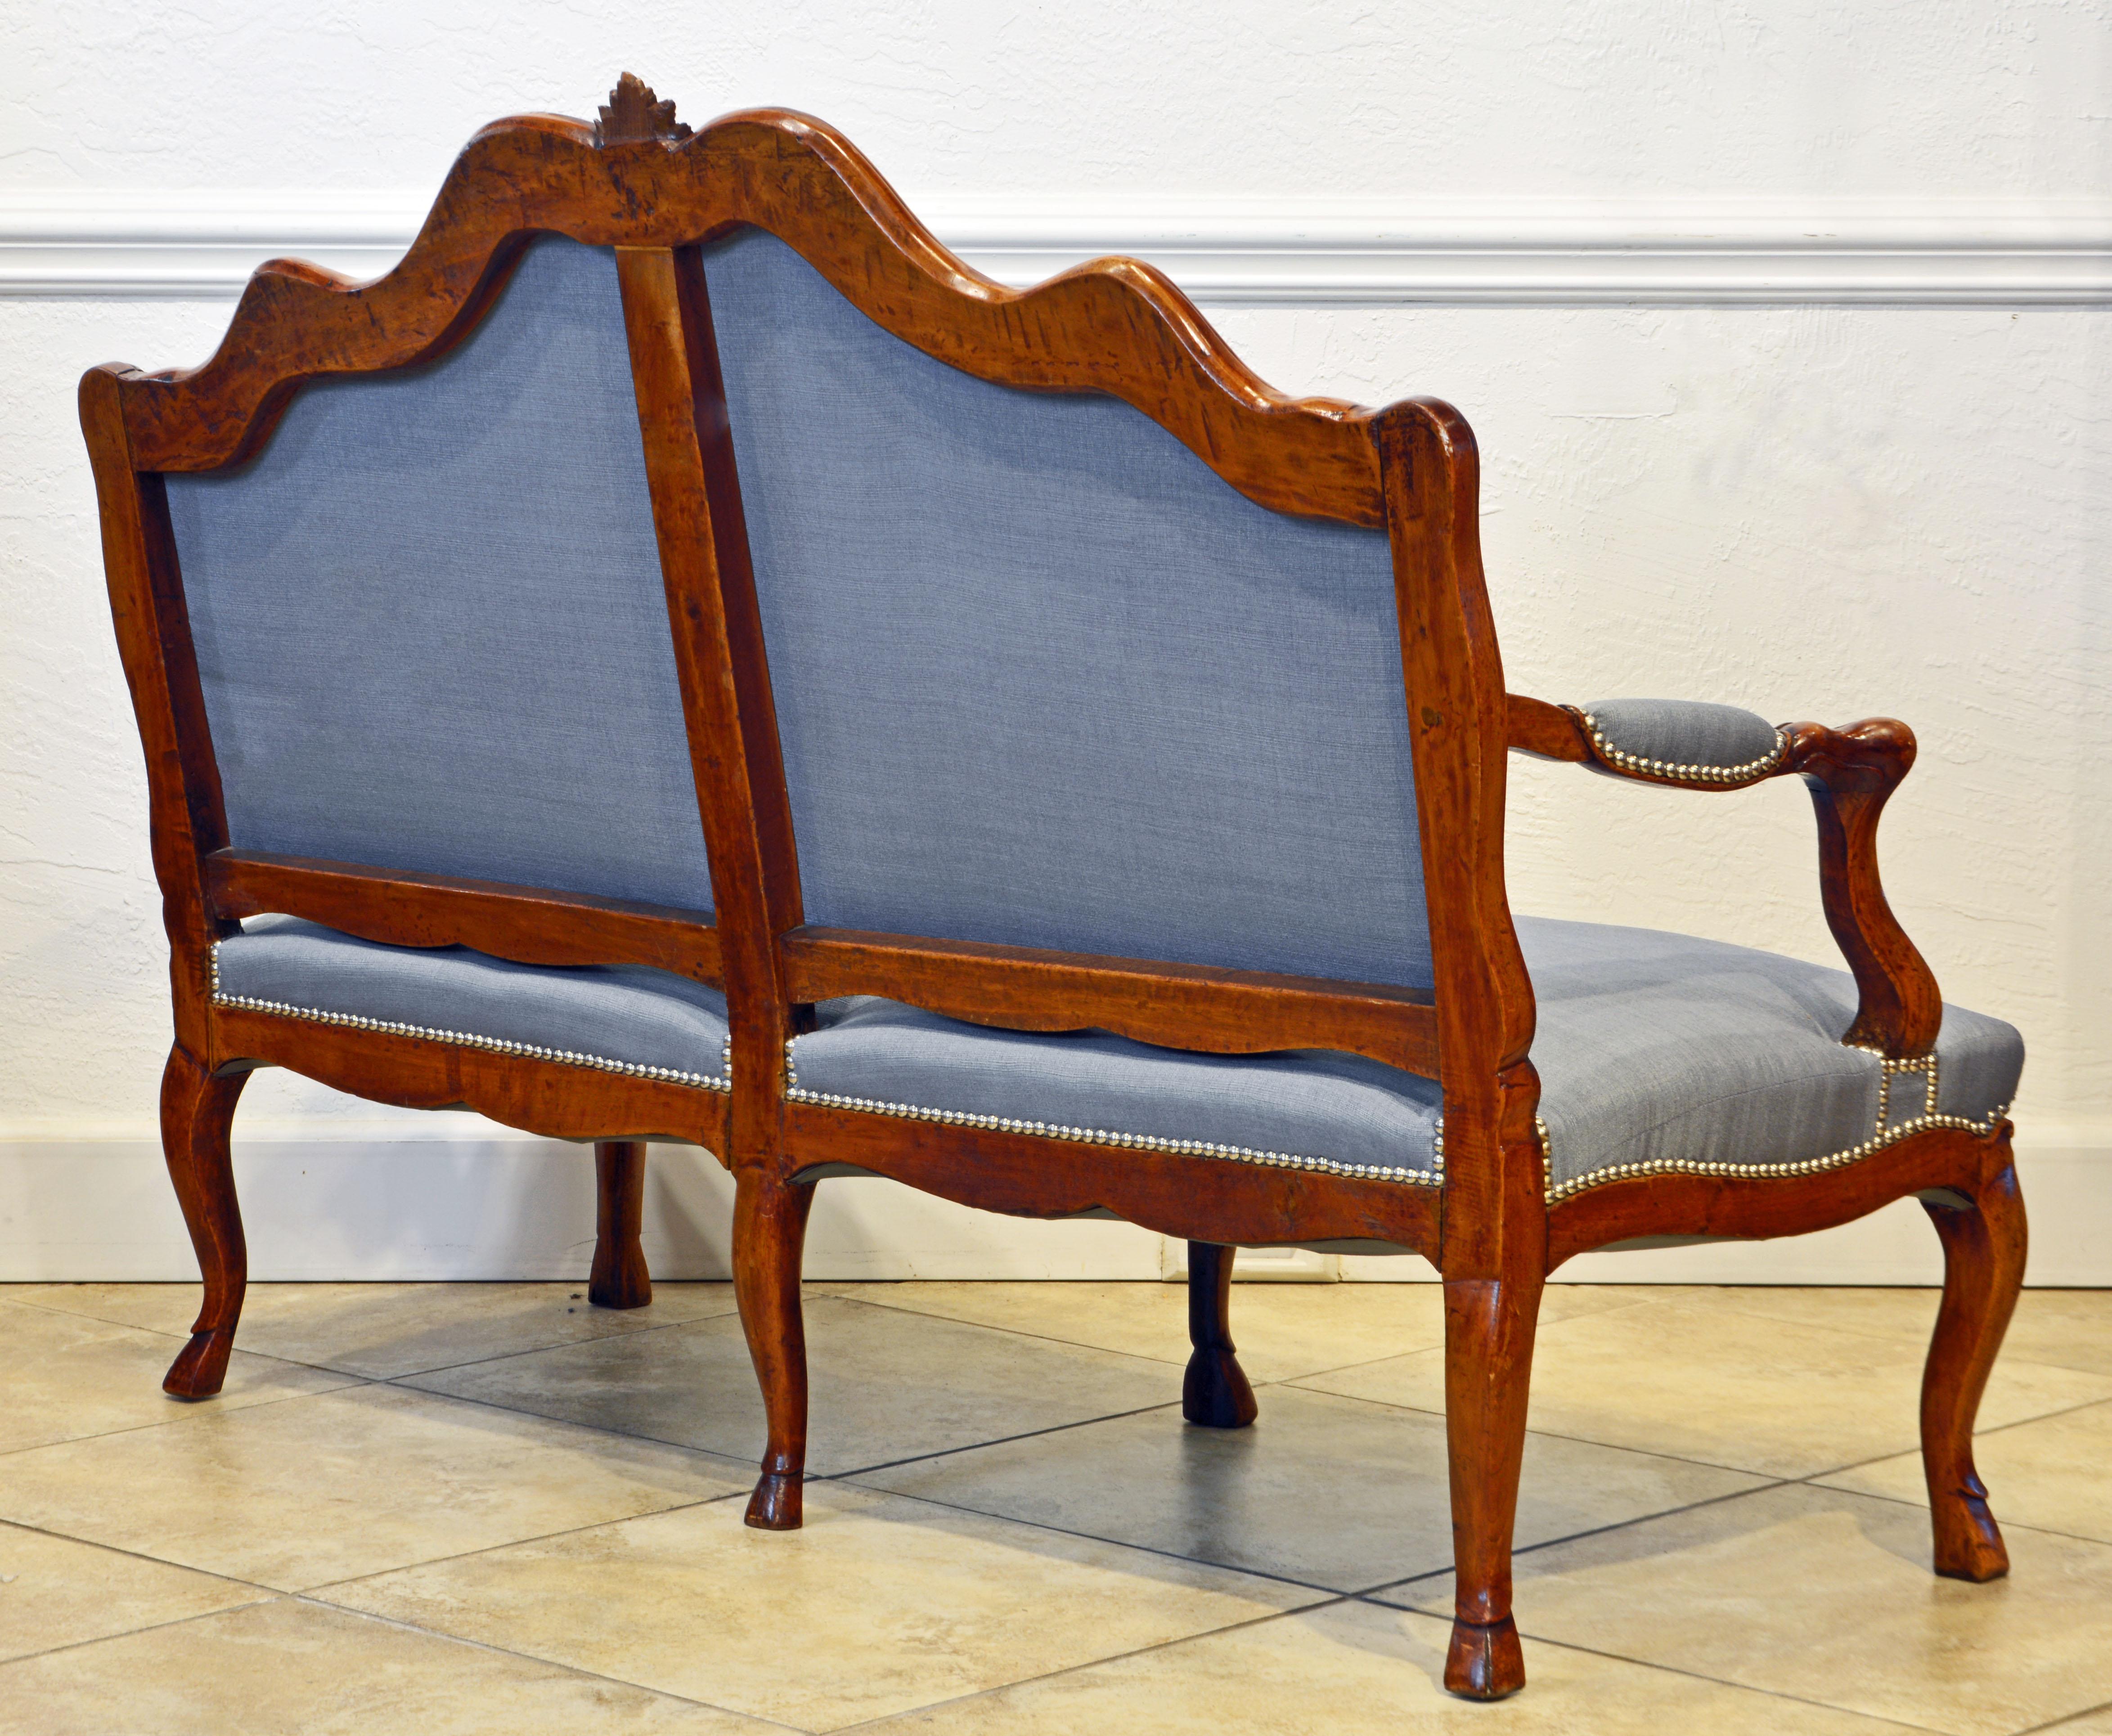 18th Century French Louis XV Carved Walnut Canape or Settee, Lovely Form and Detail